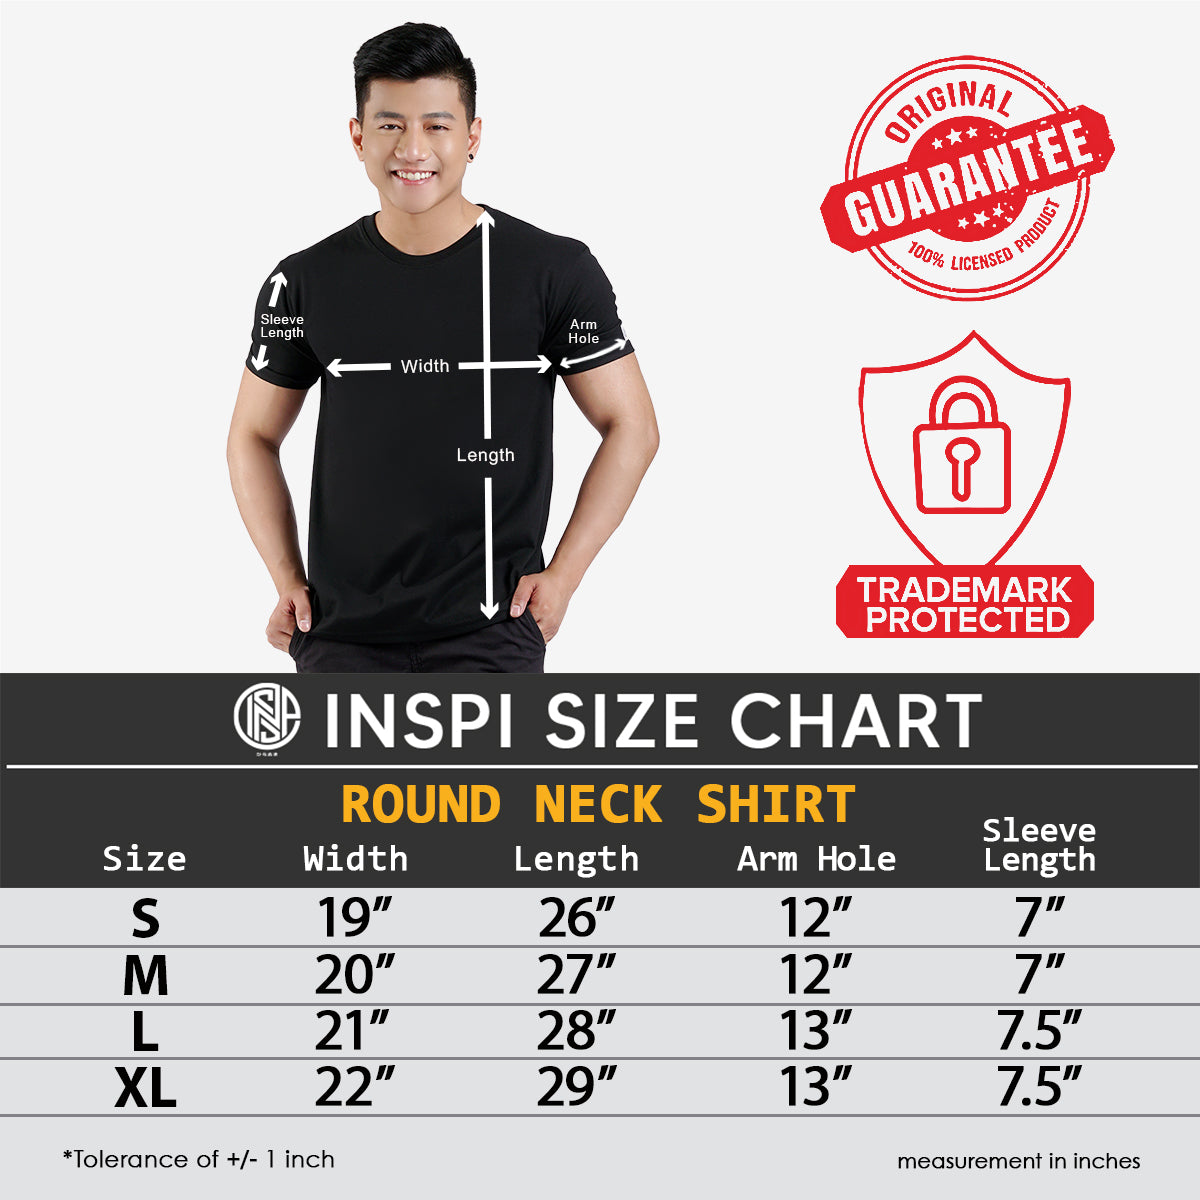 INSPI x Vrix Statement Tshirt For Men Collection Minimalist Graphic Shirt Casual Aesthetic Tees Printed Couple Shirts